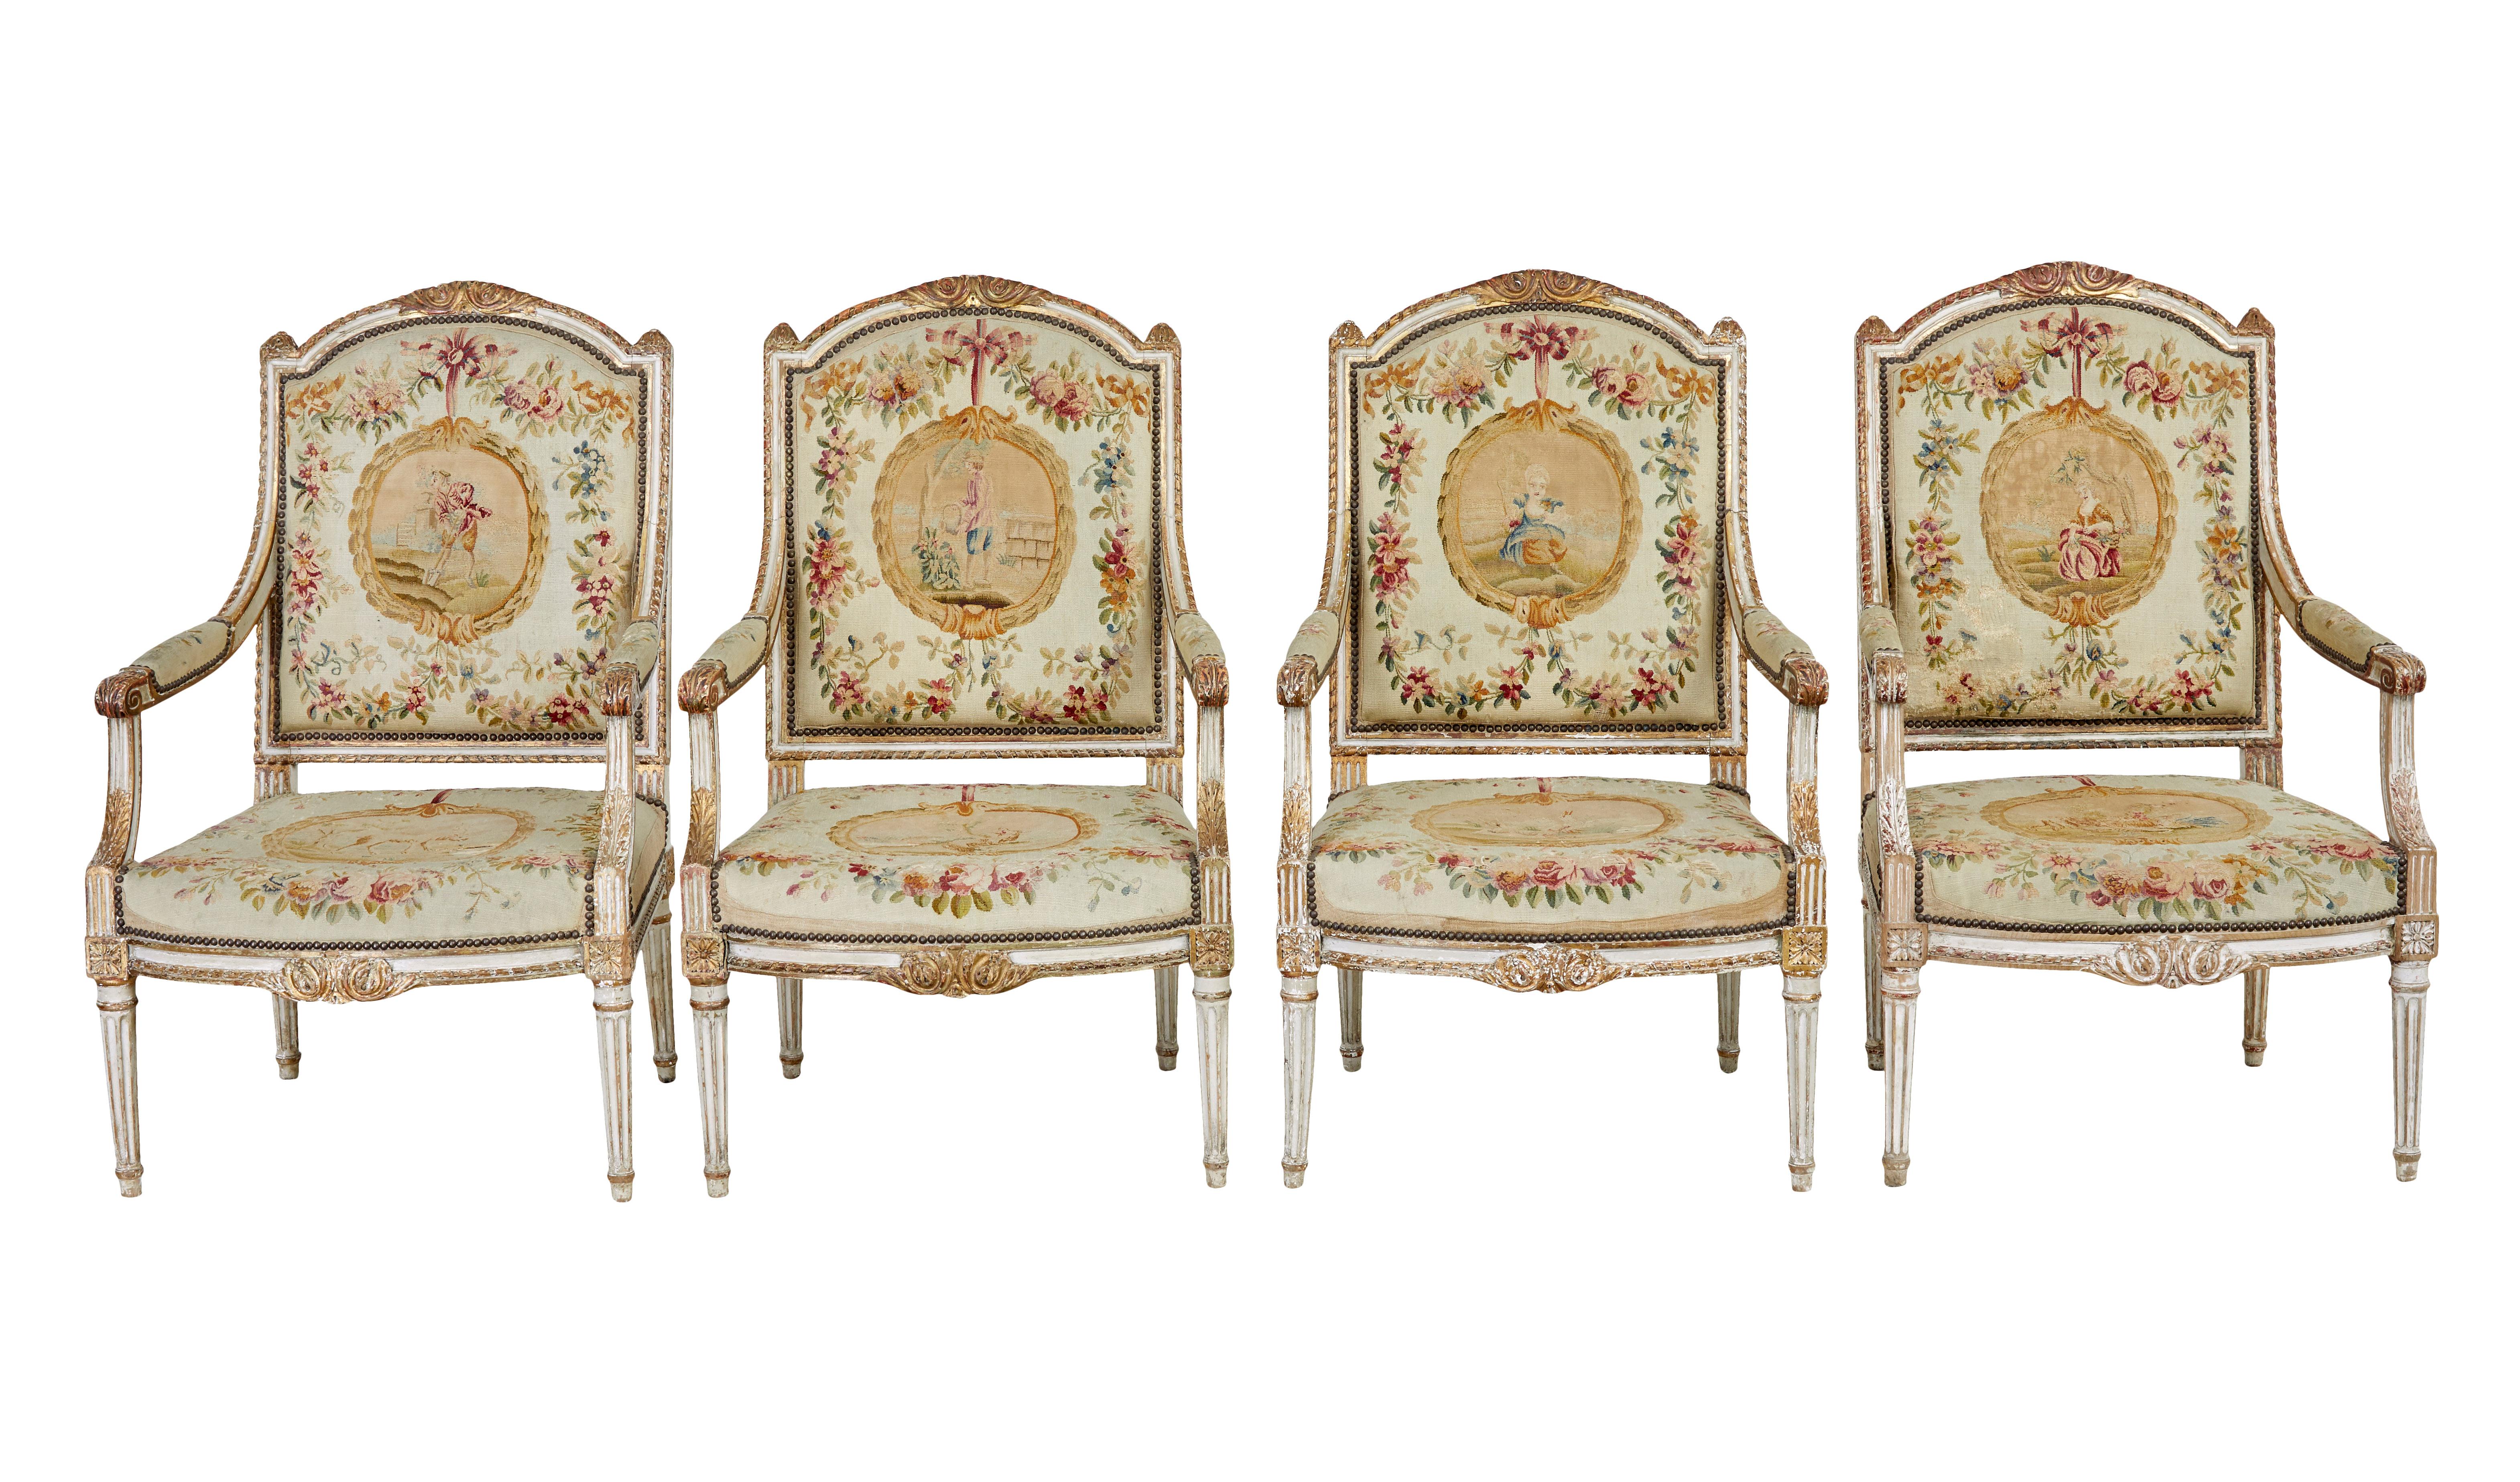 Fine quality Louis Philippe I period 5 piece gilt salon suite circa 1830.

We are pleased to offer this superb quality gilt salon suite with original tapestry covering, from the period of louis philippe the first of france.

Set comprises of a sofa